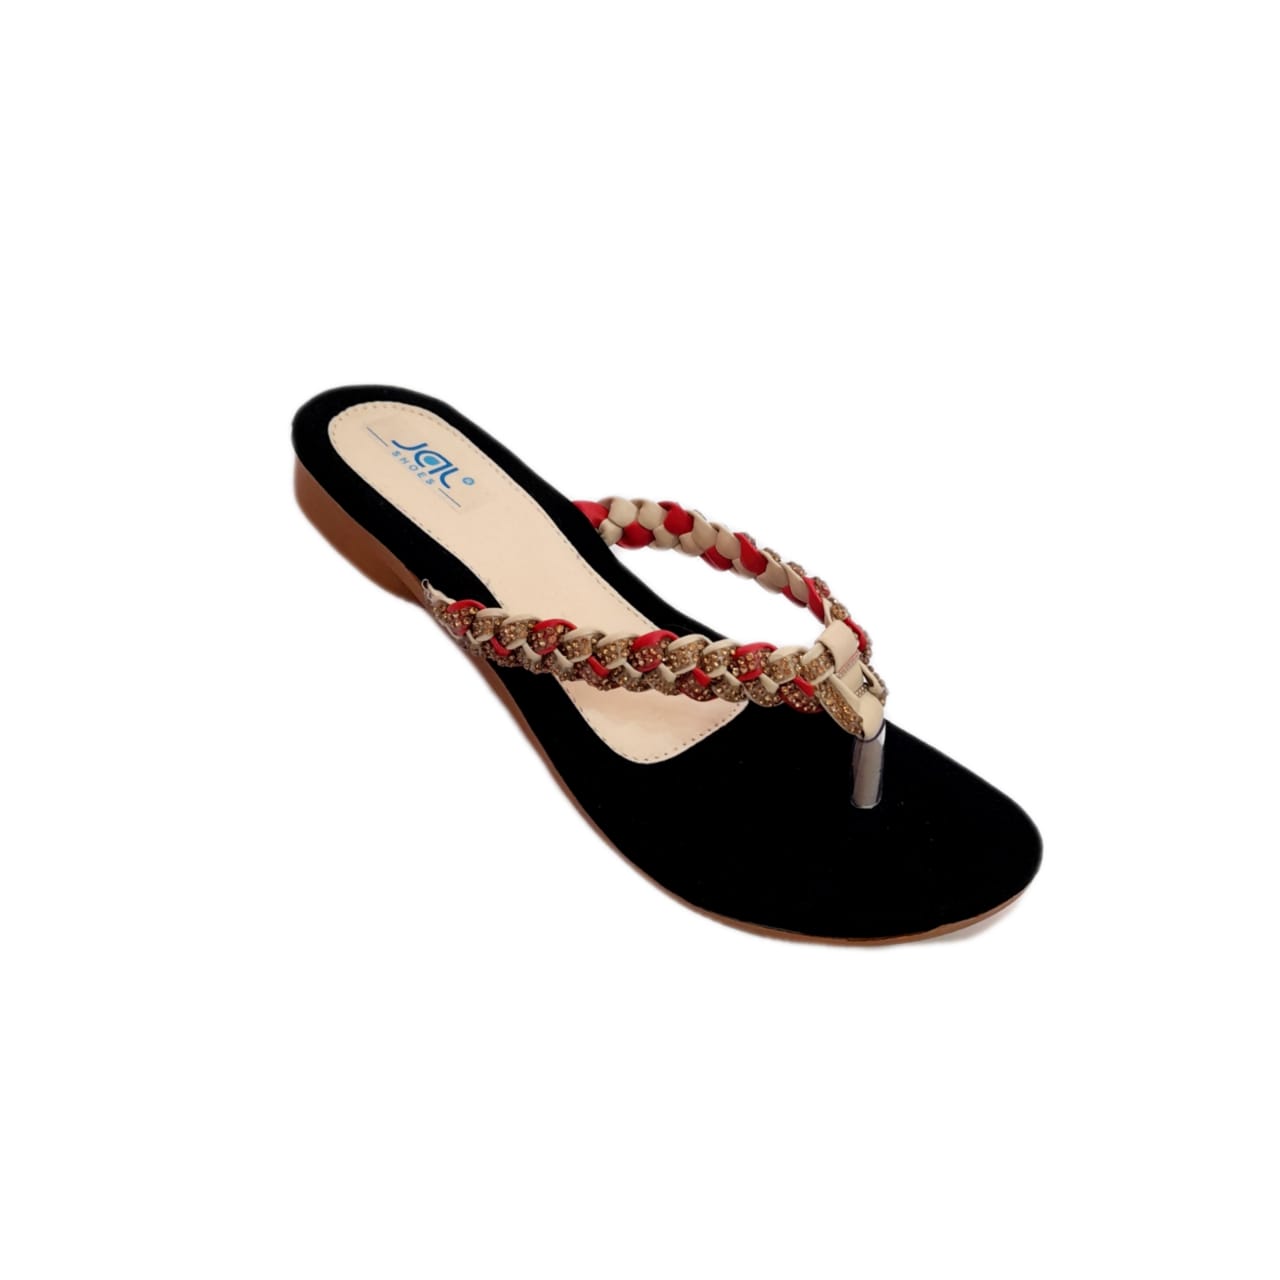 JAL Red Chappals For Women - Jalshoes